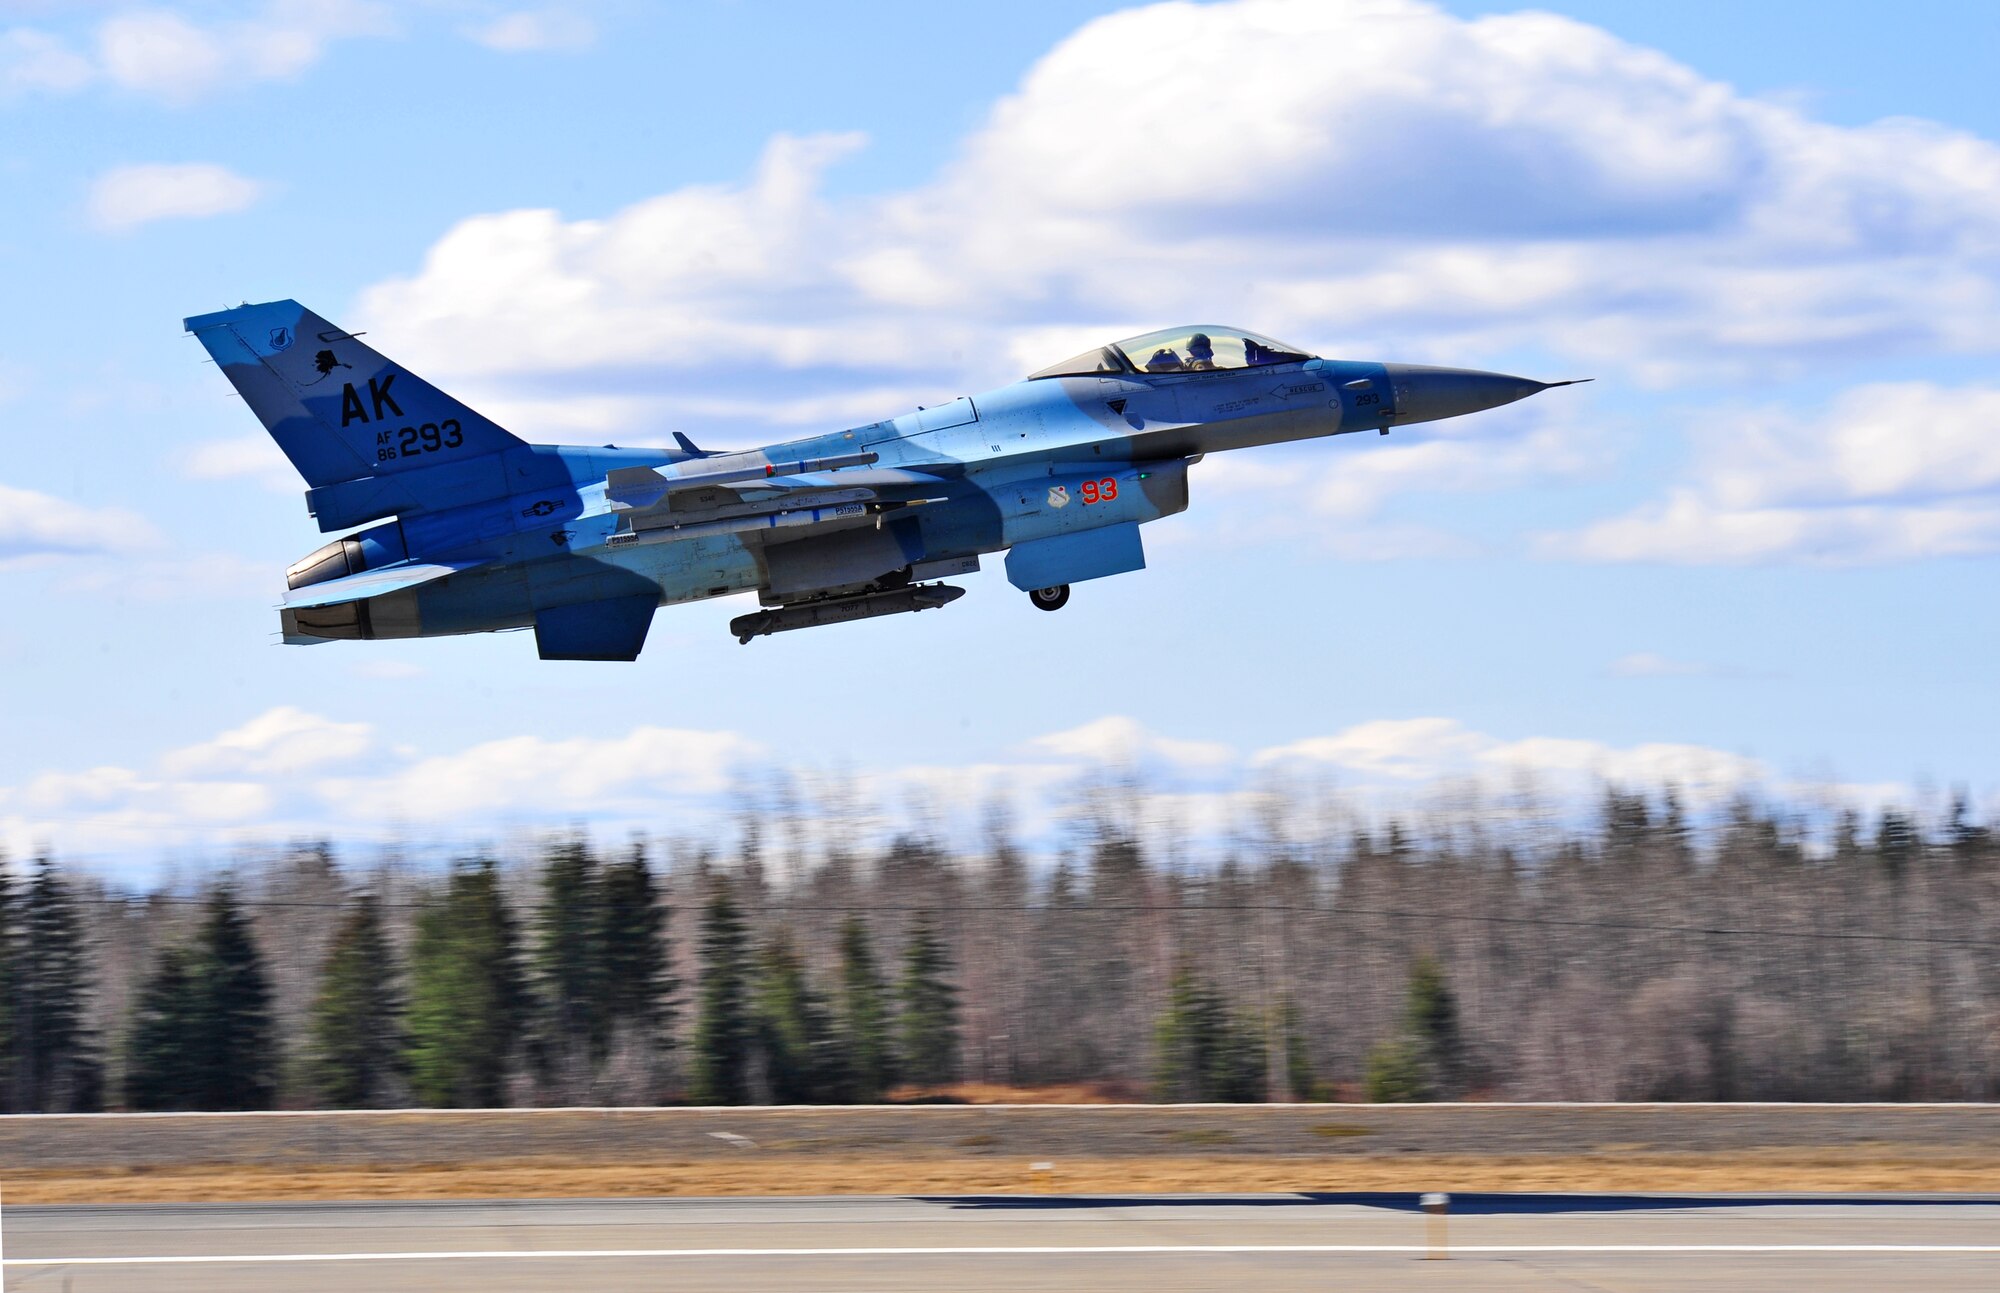 An F-16 Fighting Falcon aircraft assigned to the 18th Aggressor Squadron takes off for an afternoon mission April 28, 2015, during Distant Frontier at Eielson Air Force Base, Alaska.  Aggressor pilots are trained to act as opposing forces in RED FLAG-Alaska to prepare U.S. and allied forces for real-world aerial combat. (U.S. Air Force photo by Tech. Sgt. Miguel Lara III/Released)